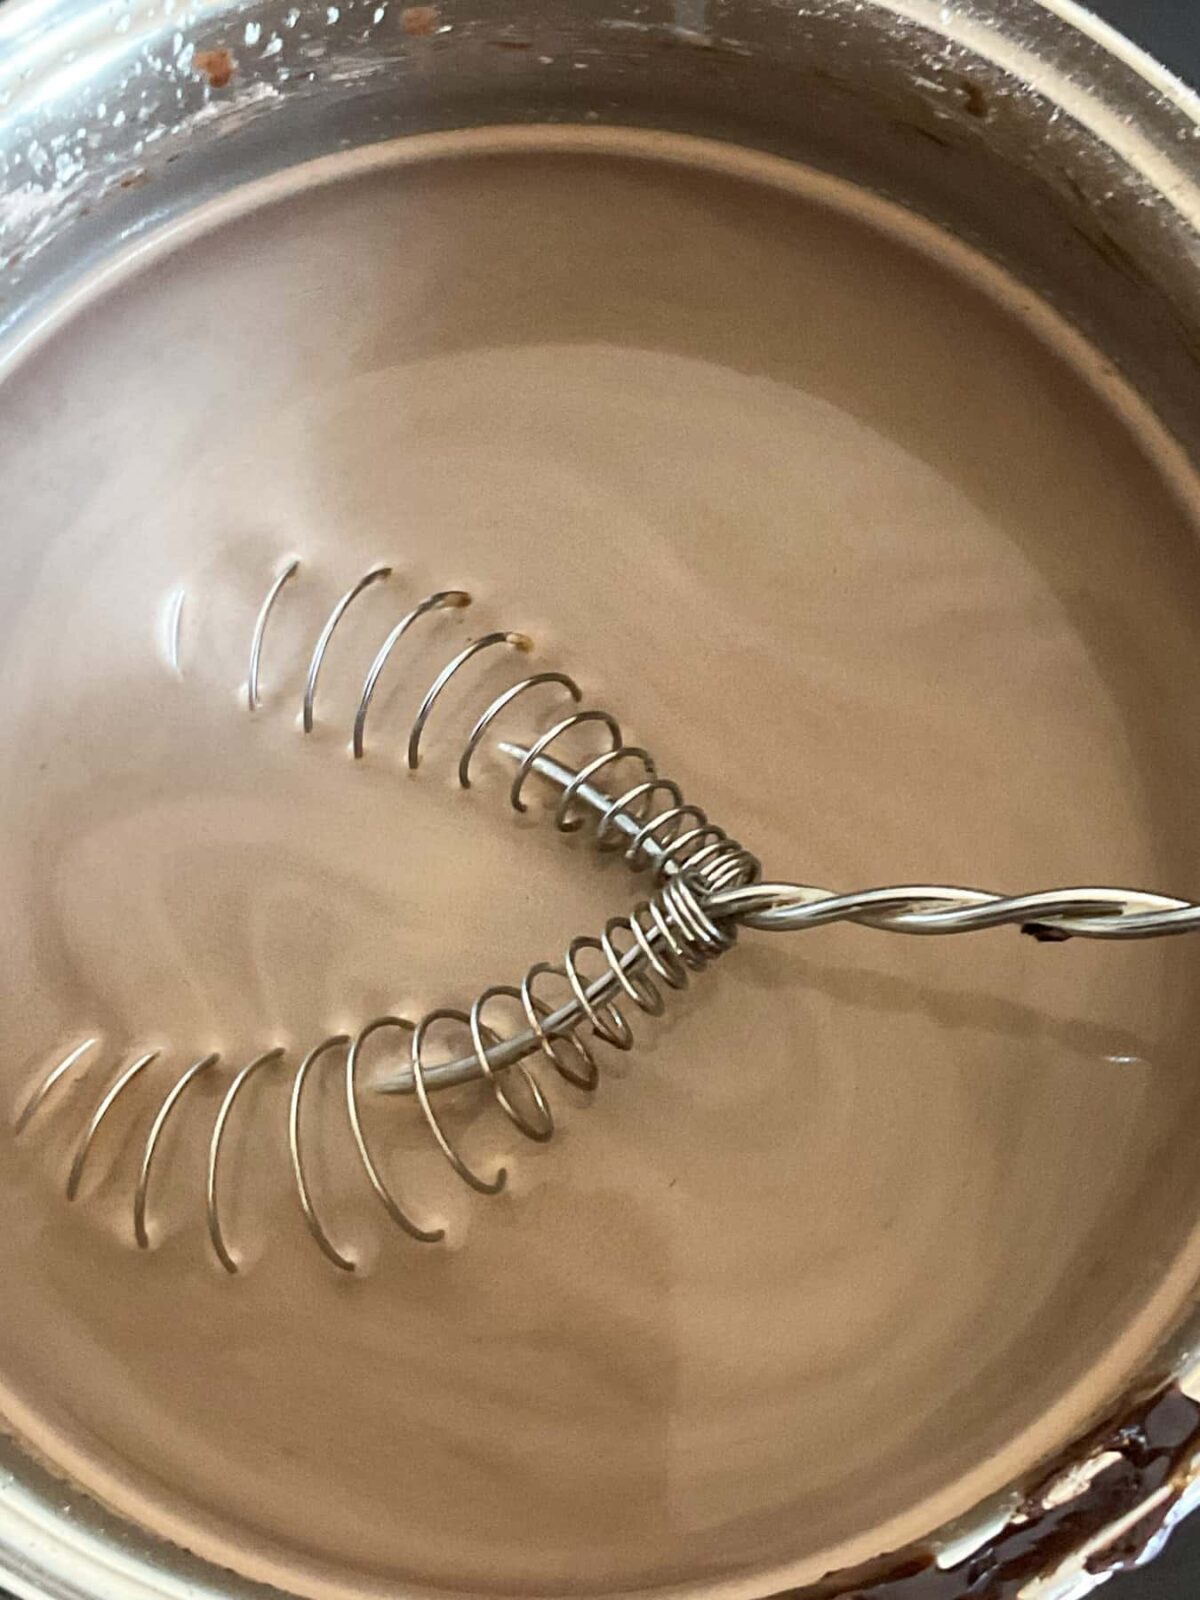 Milk added to dry ingredients in pan and stirred with a balloon whisk.